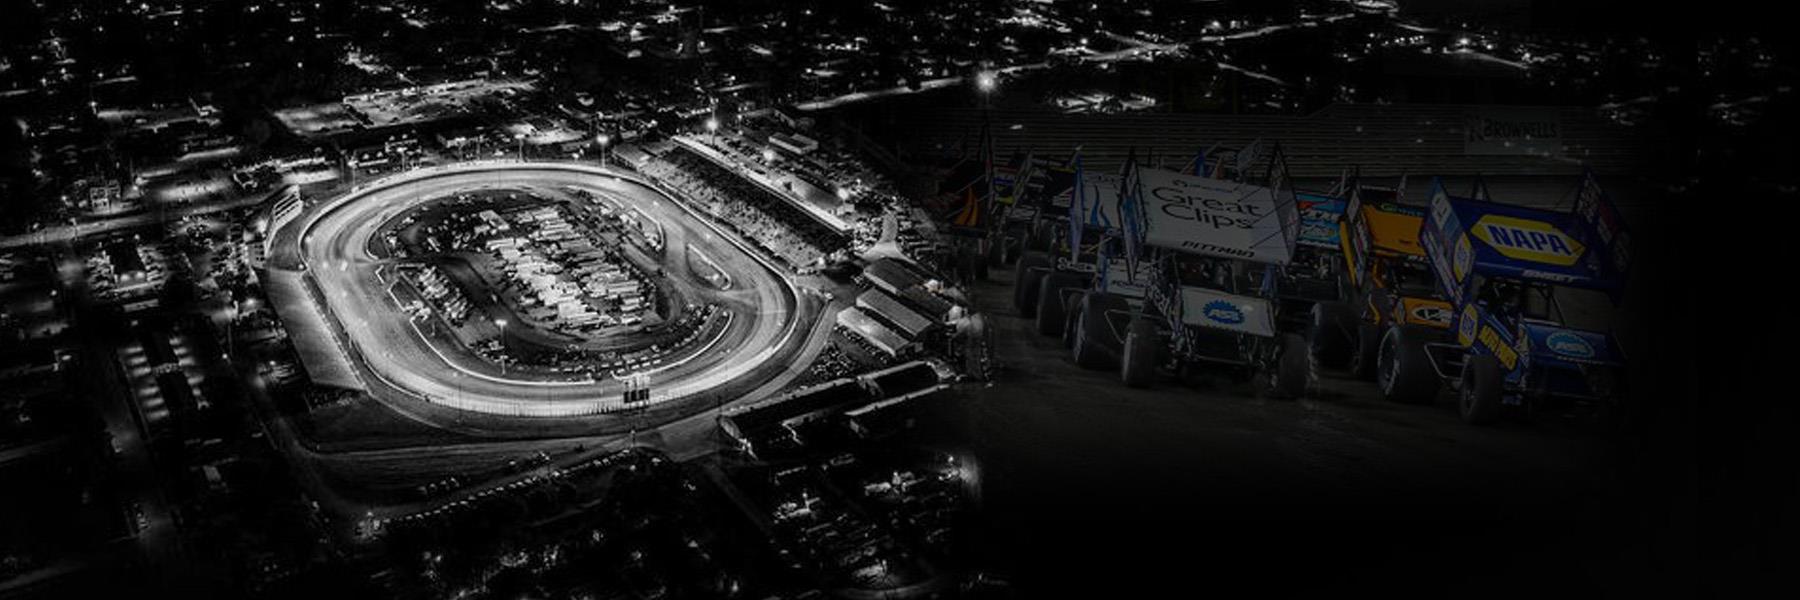 6/11/2021 - Knoxville Raceway